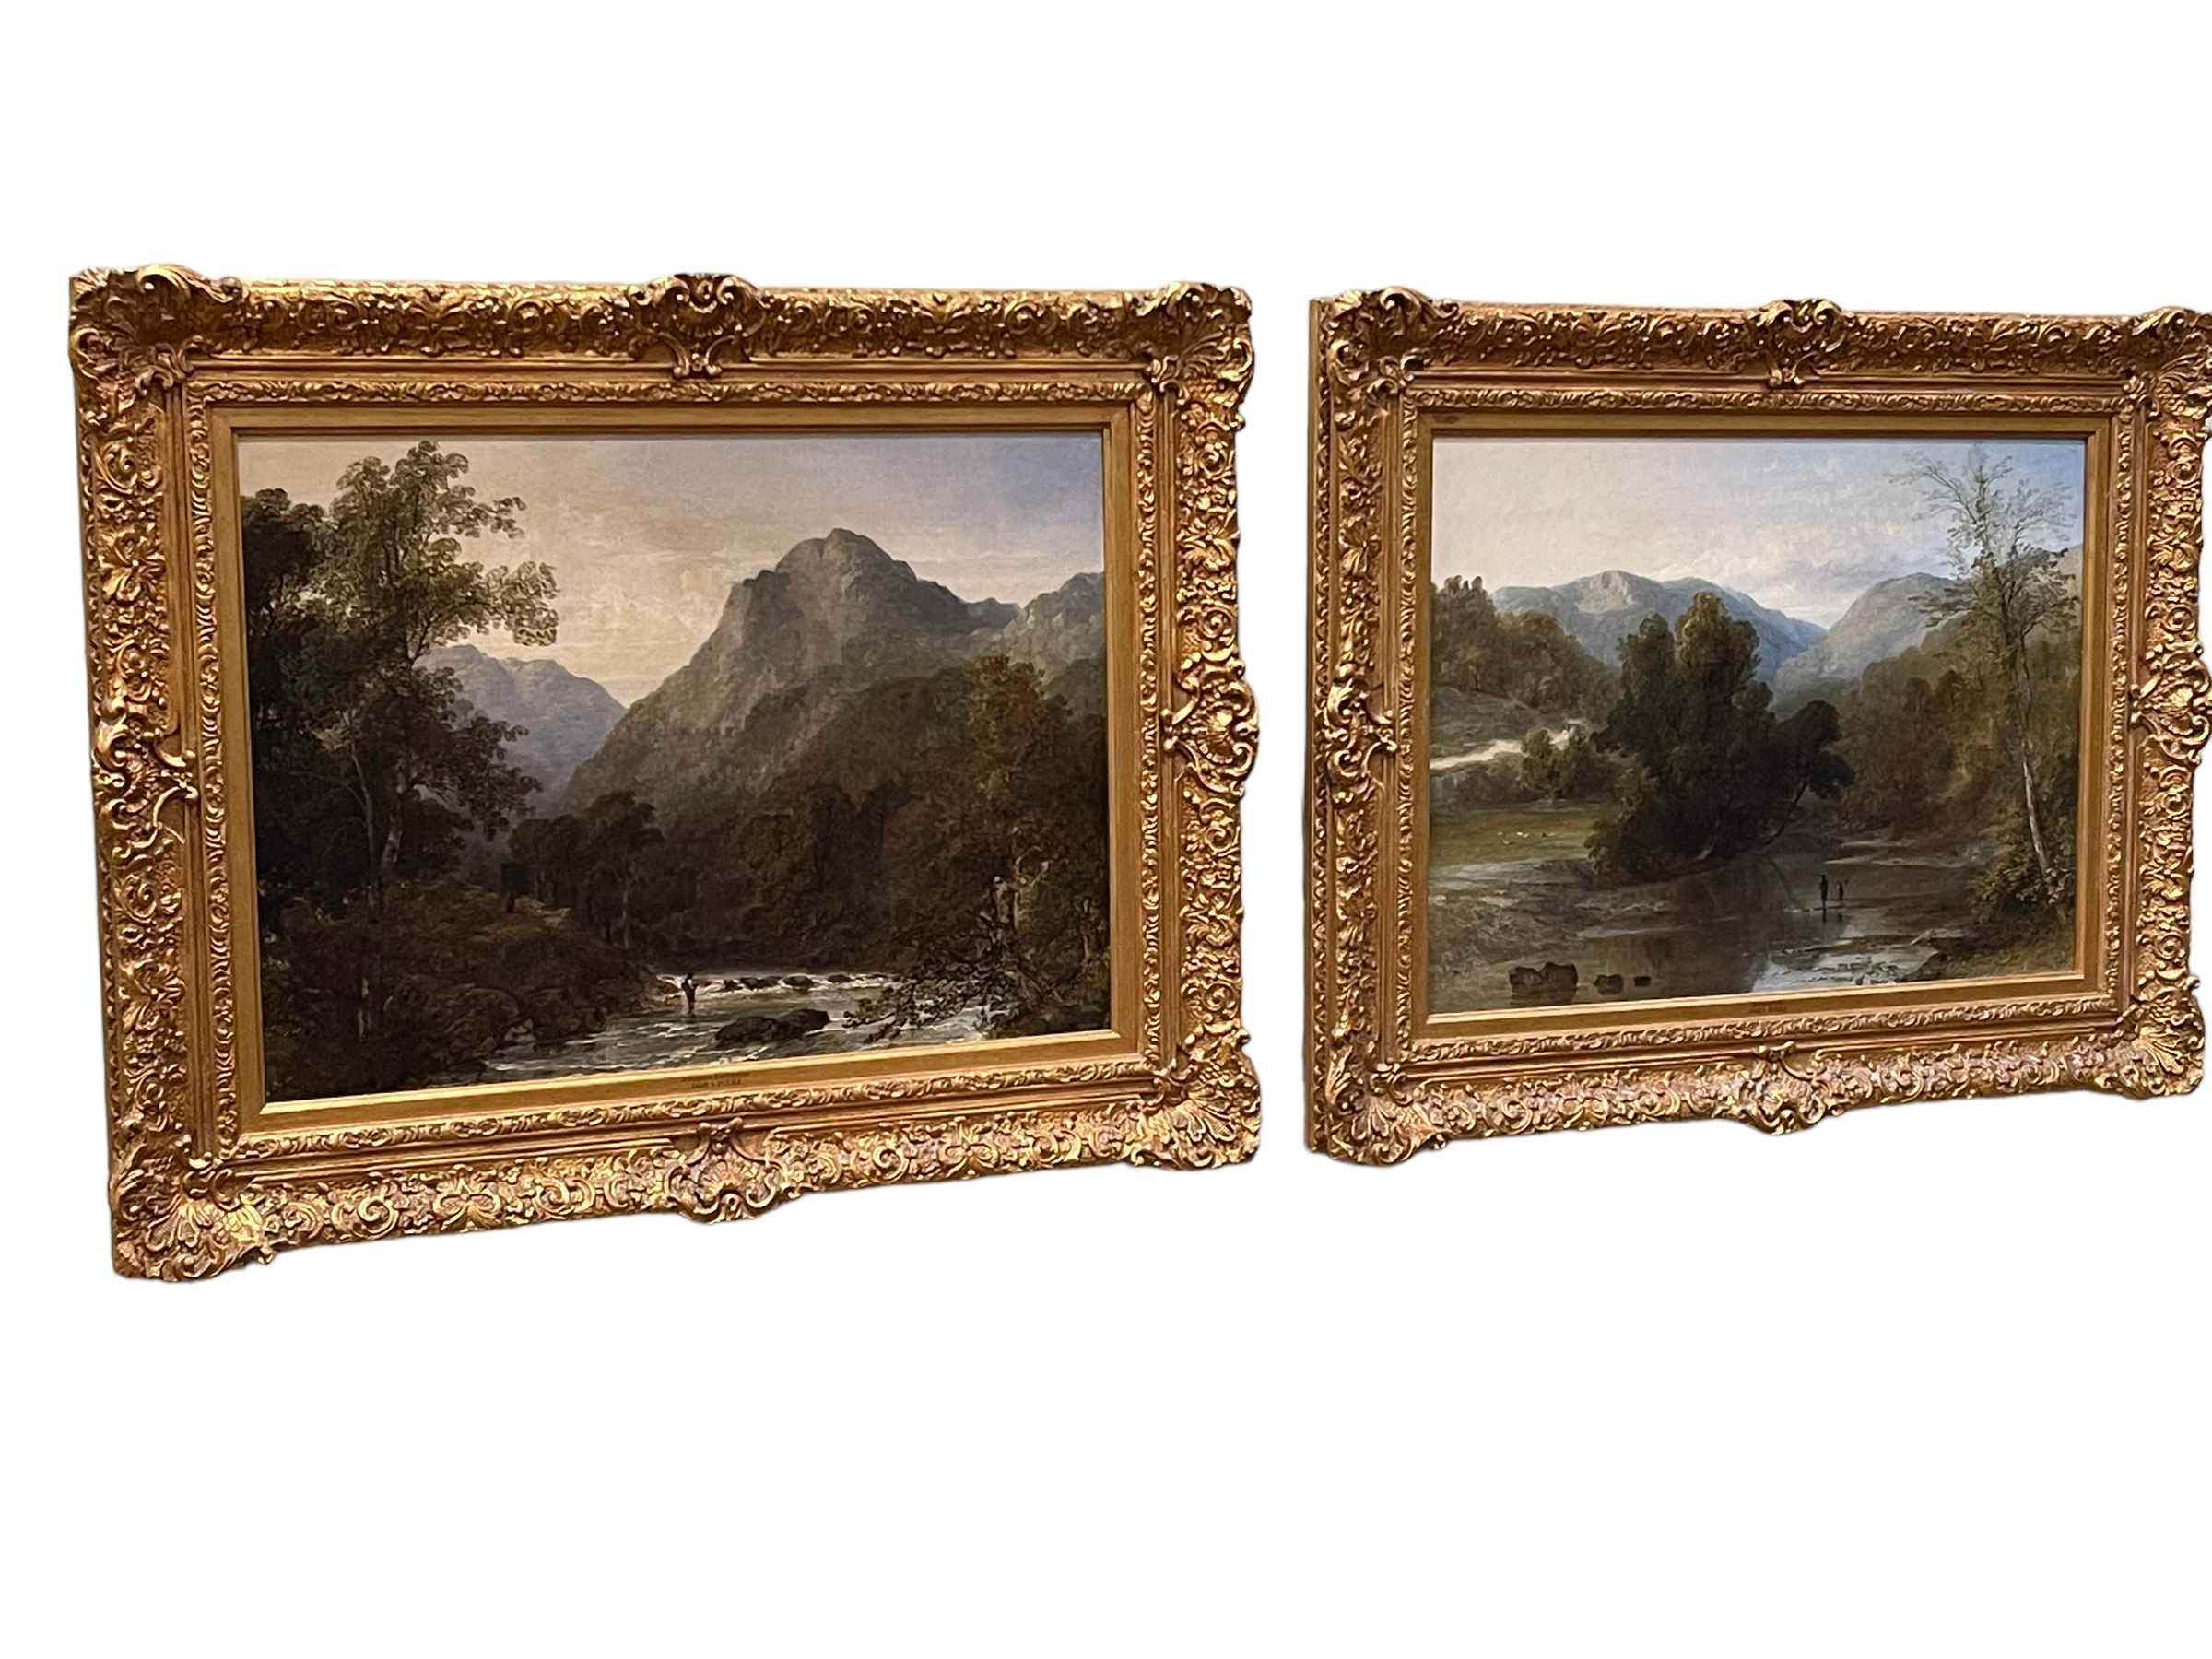 James Poole (British 1804-1886), Ashopton, Derbyshire and Borrowdale, pair of oils on canvas,